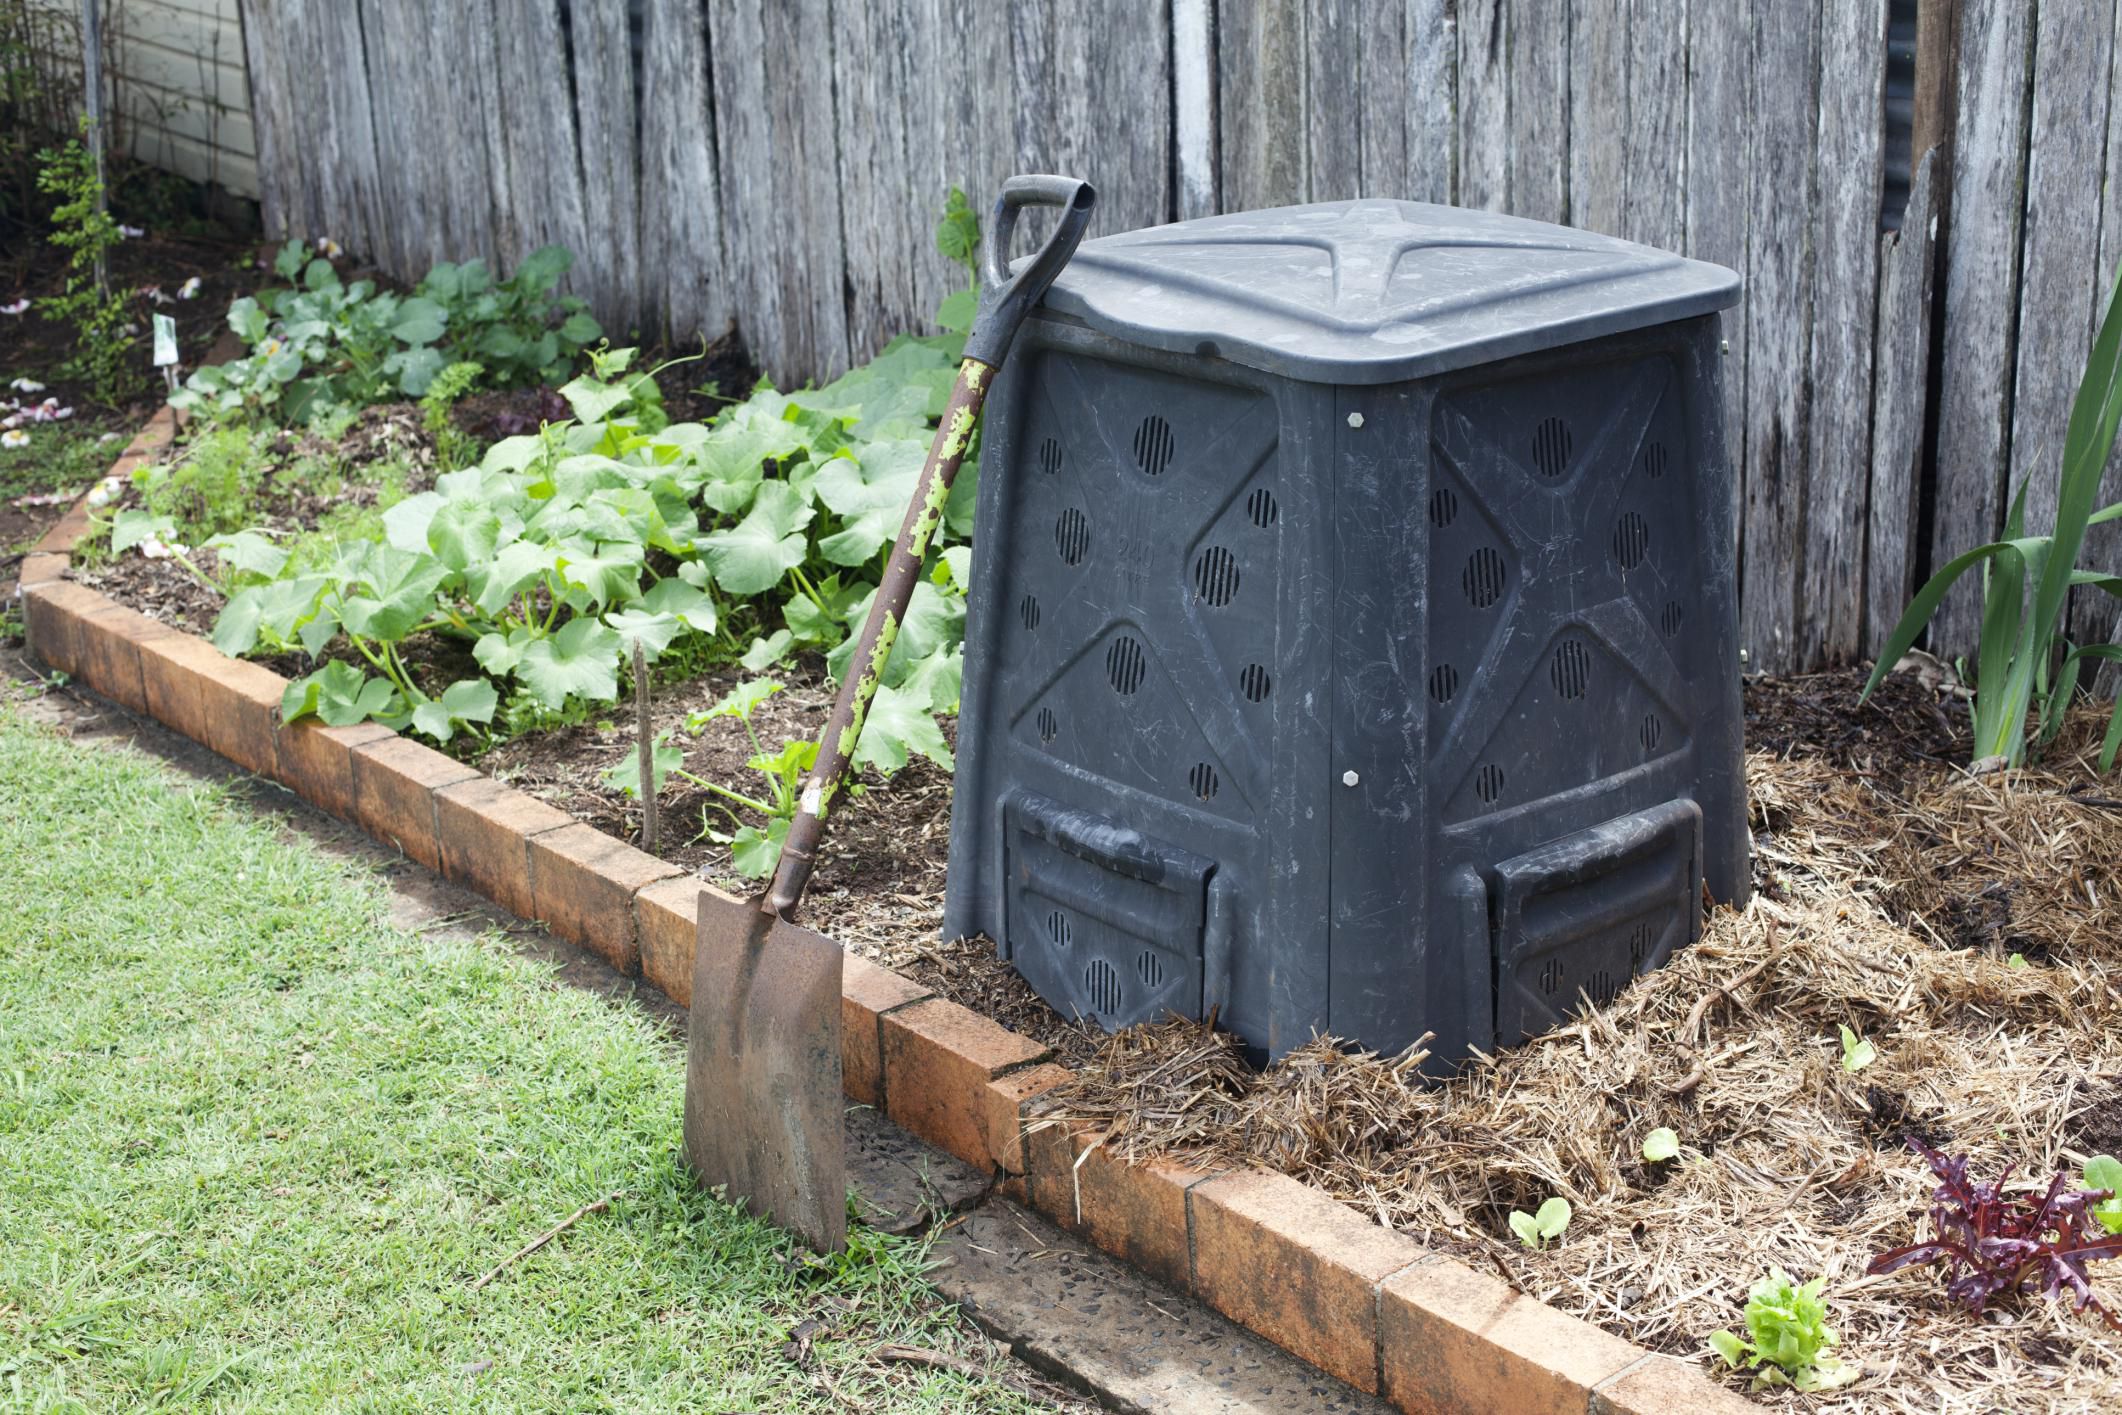 Composting Weeds: Advice and What to Avoid